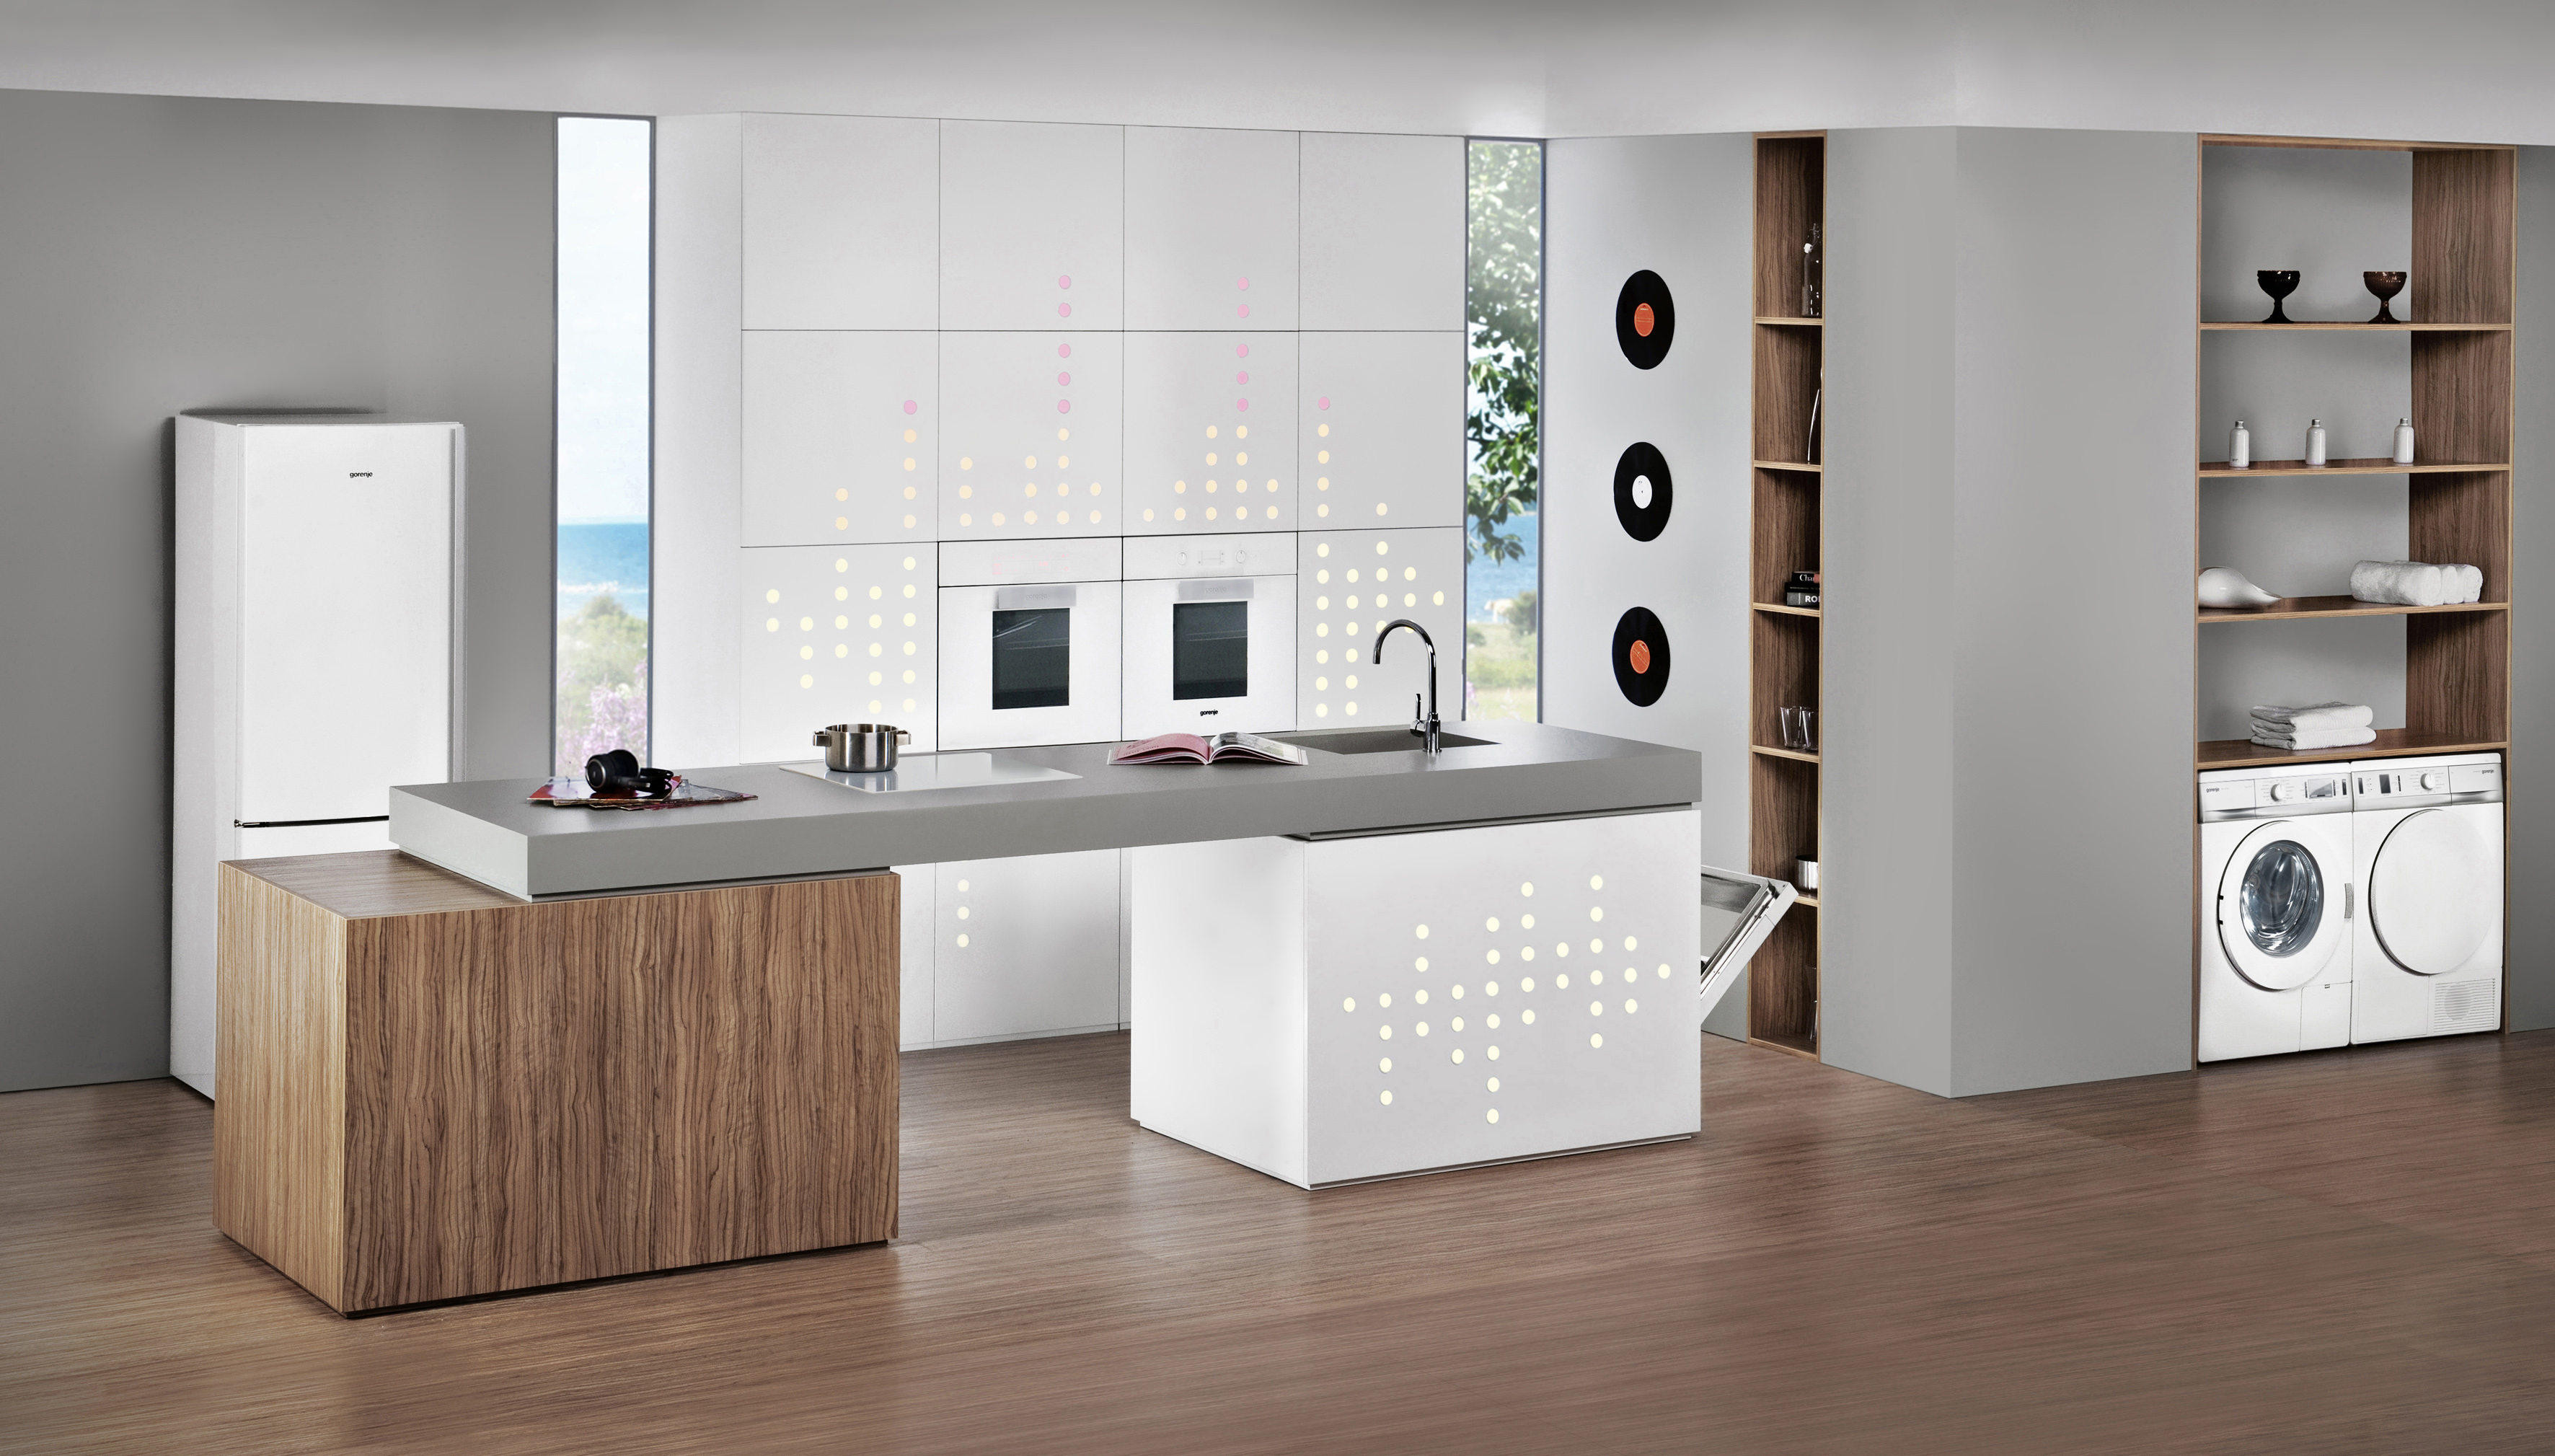 gorenje-one_ambient_induction